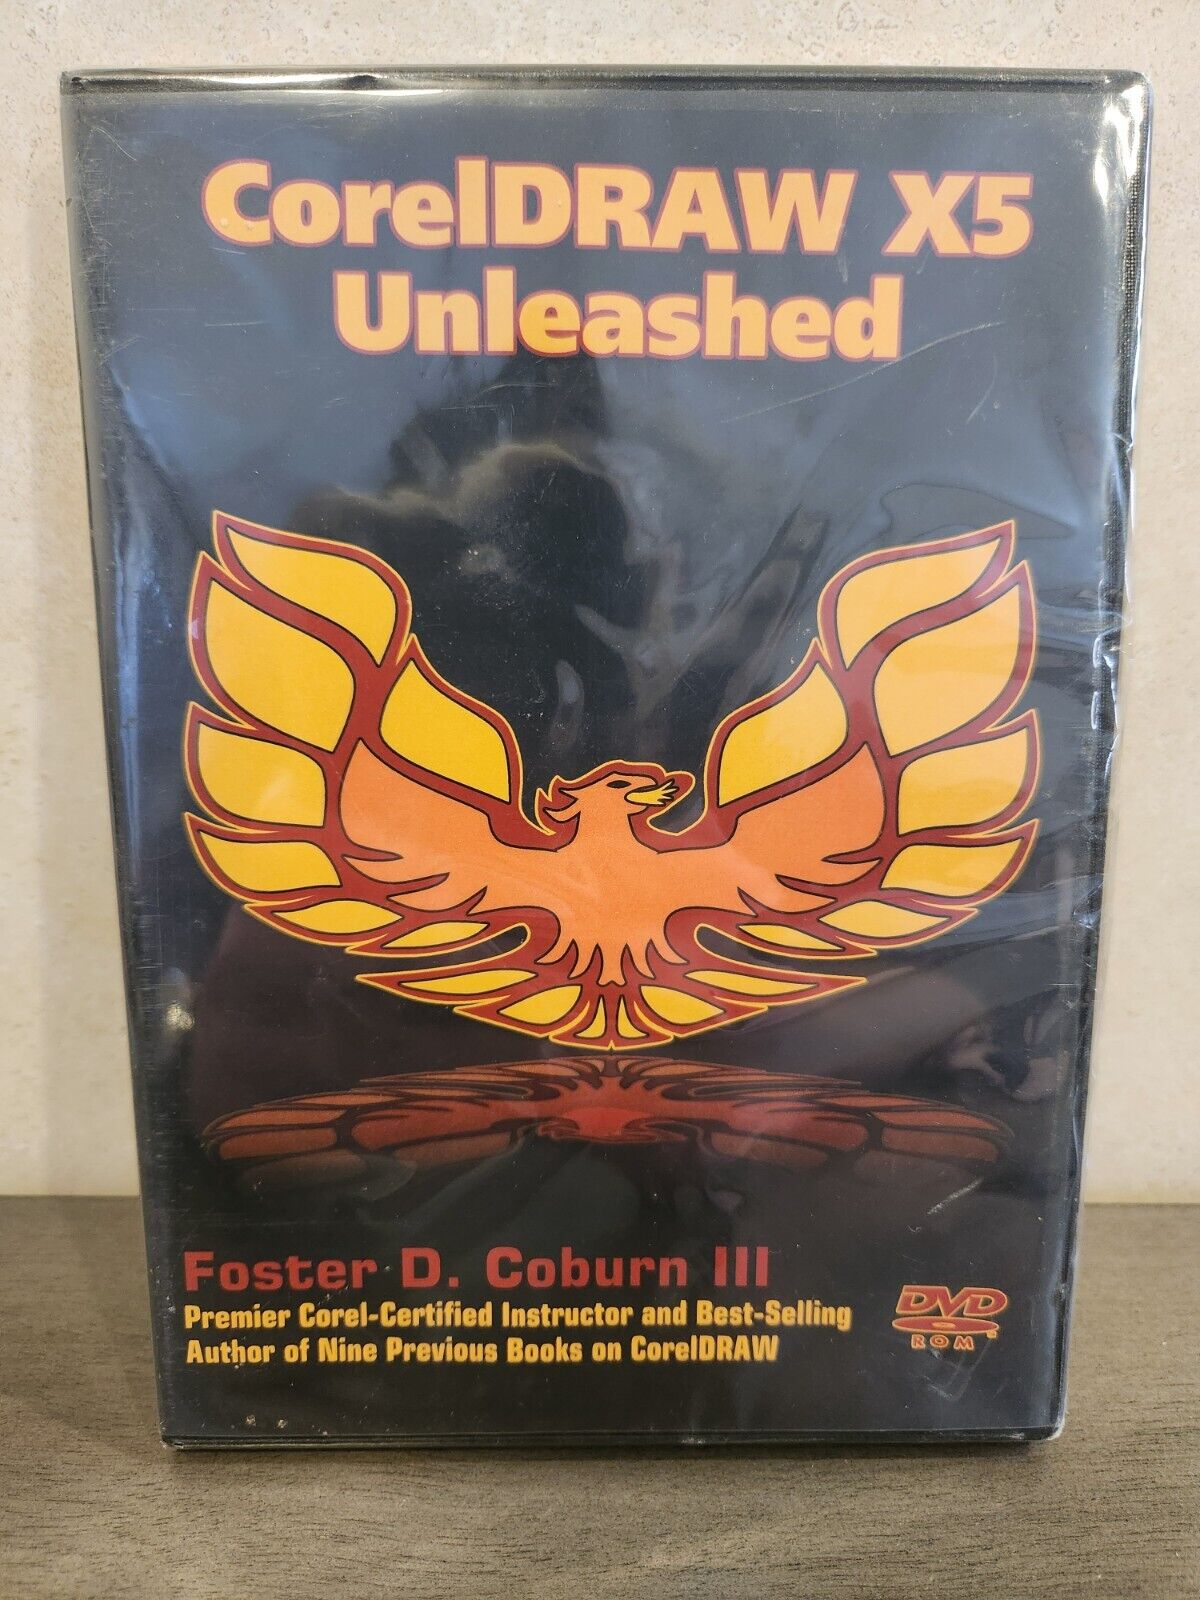 Rare Brand New Sealed CorelDRAW X5 Unleashed DVD-ROM By Foster D. Coburn III 